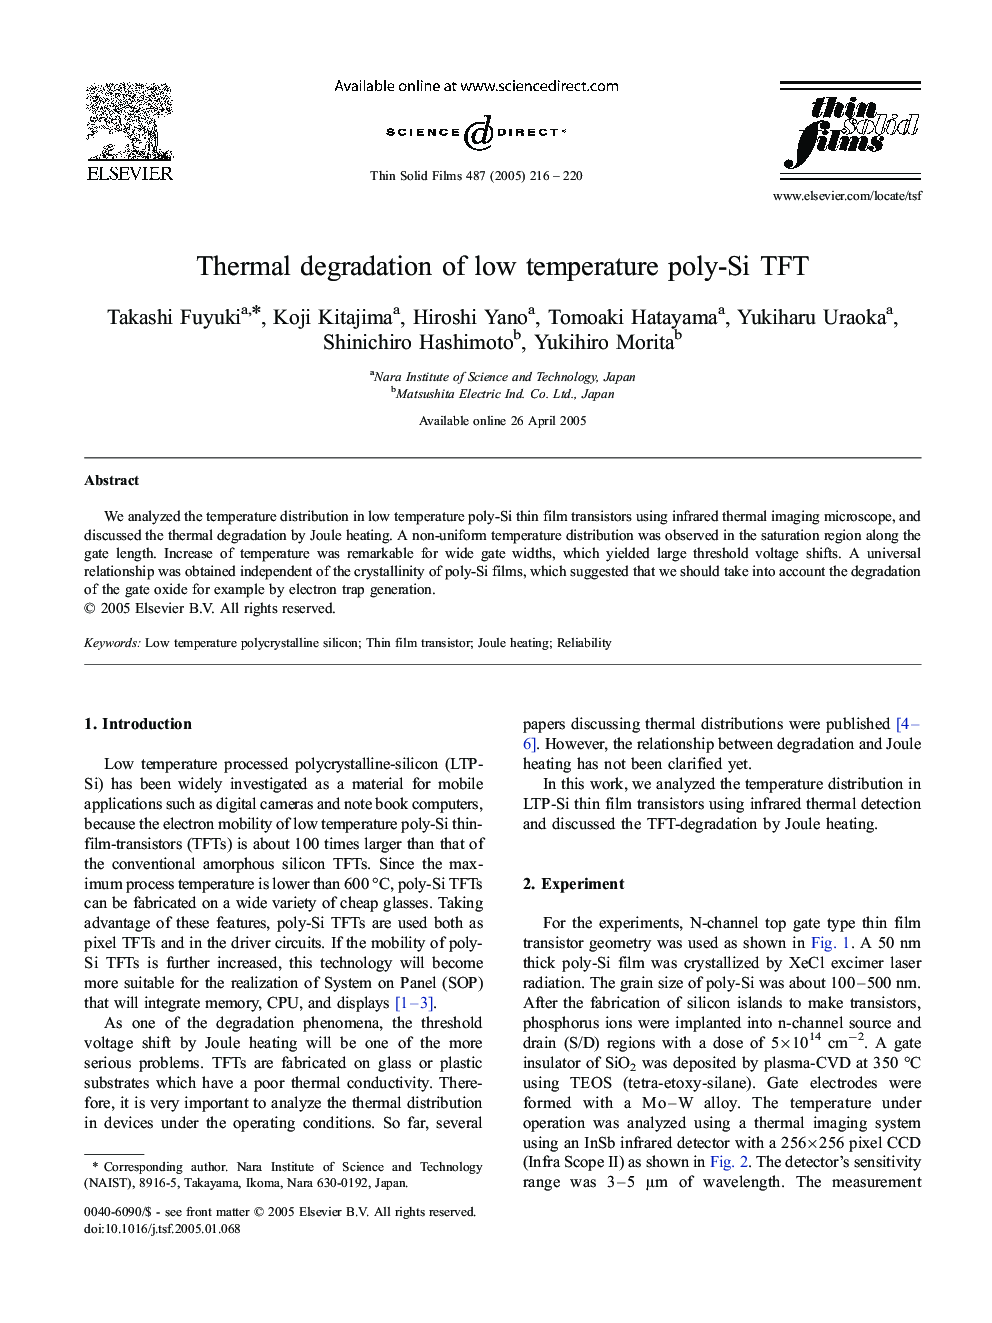 Thermal degradation of low temperature poly-Si TFT